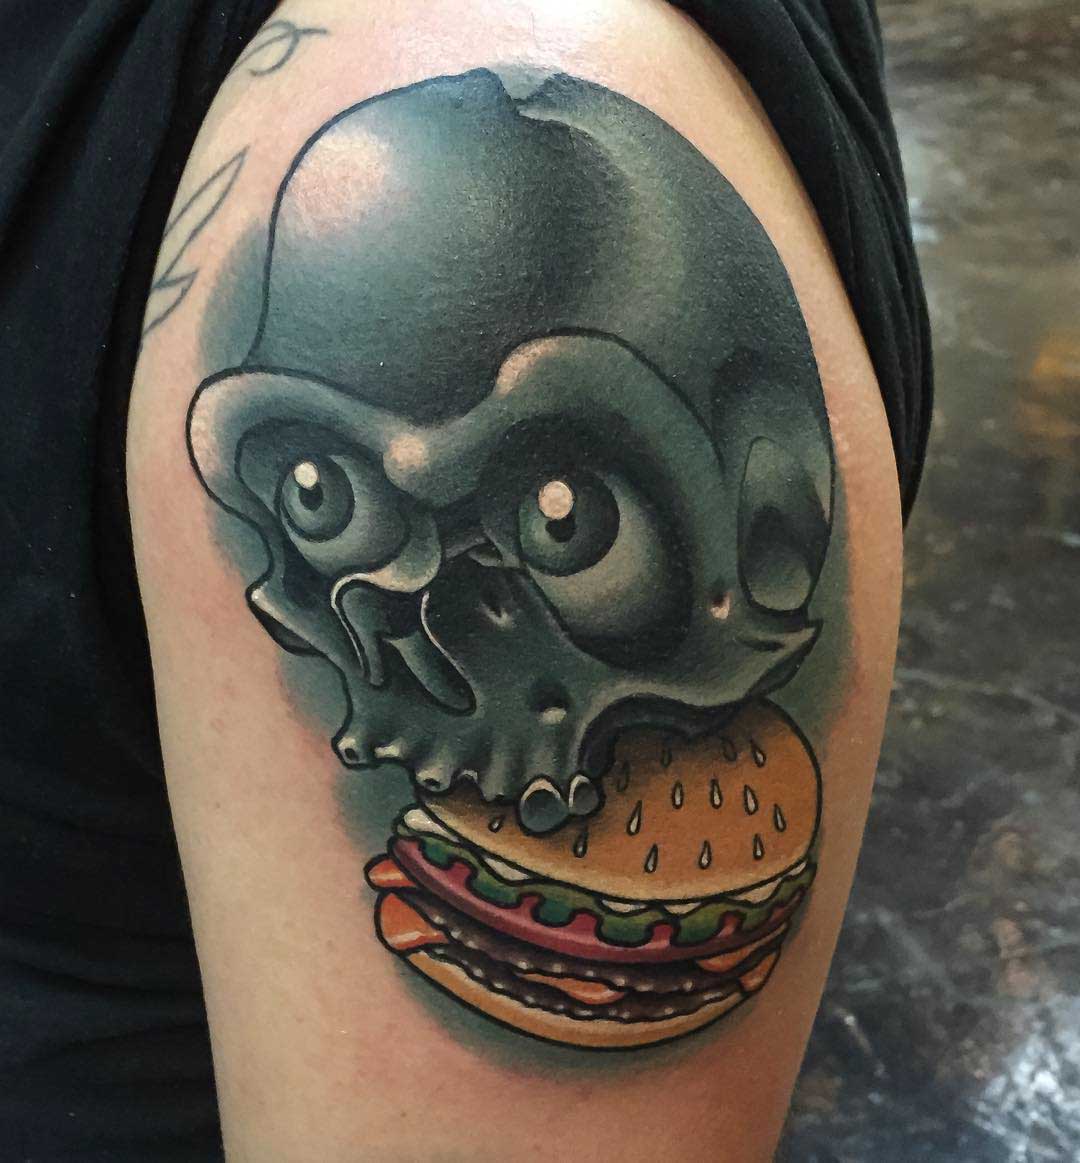 shoulder tattoo of skull and burger, new school style